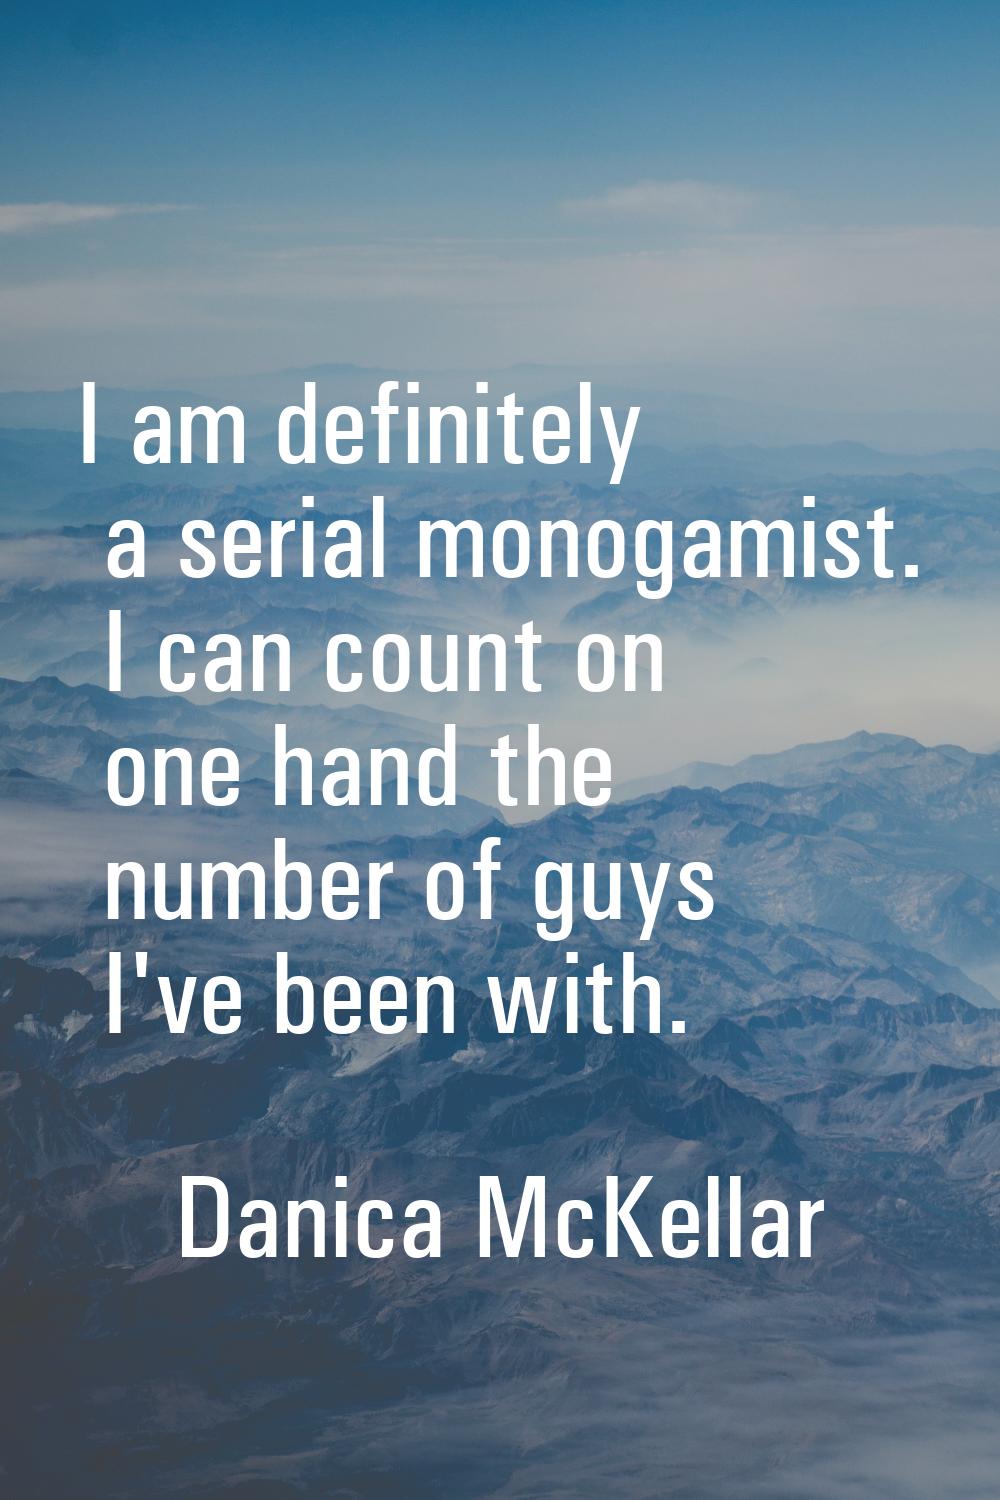 I am definitely a serial monogamist. I can count on one hand the number of guys I've been with.